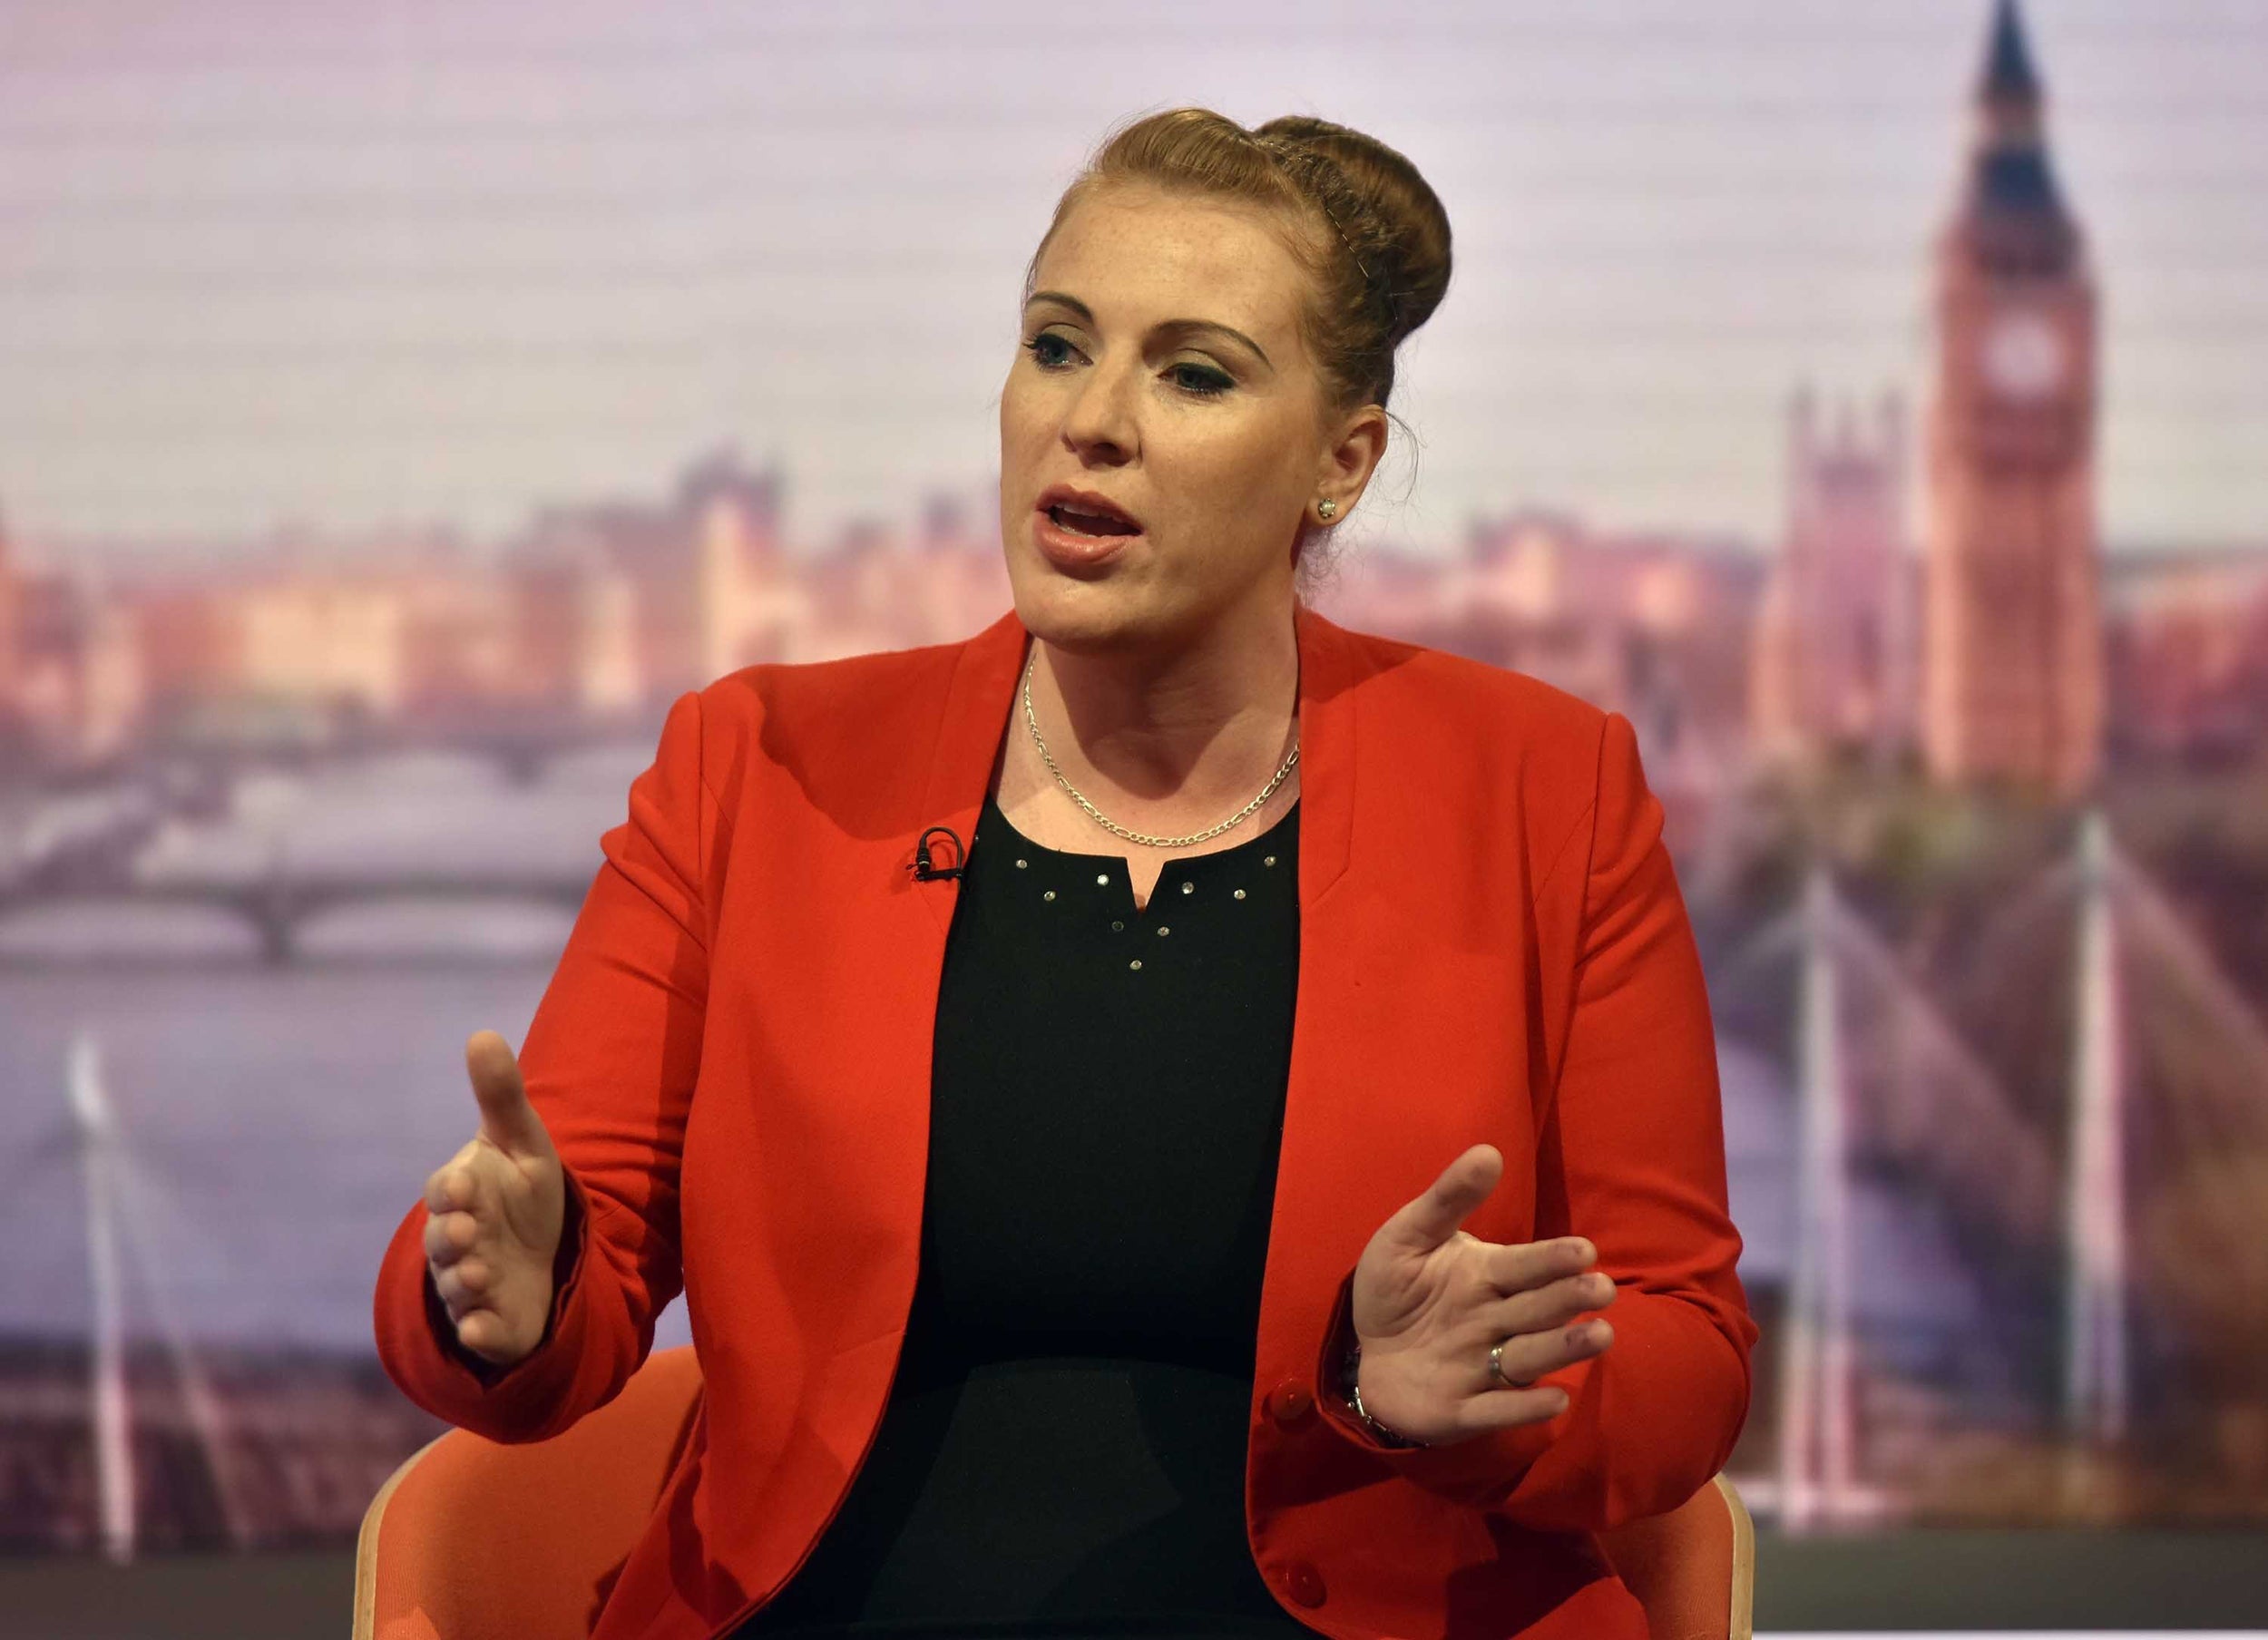 The Shadow Education Secretary said the policy remained an ‘ambition’ because Labour did not know yet how it would be funded